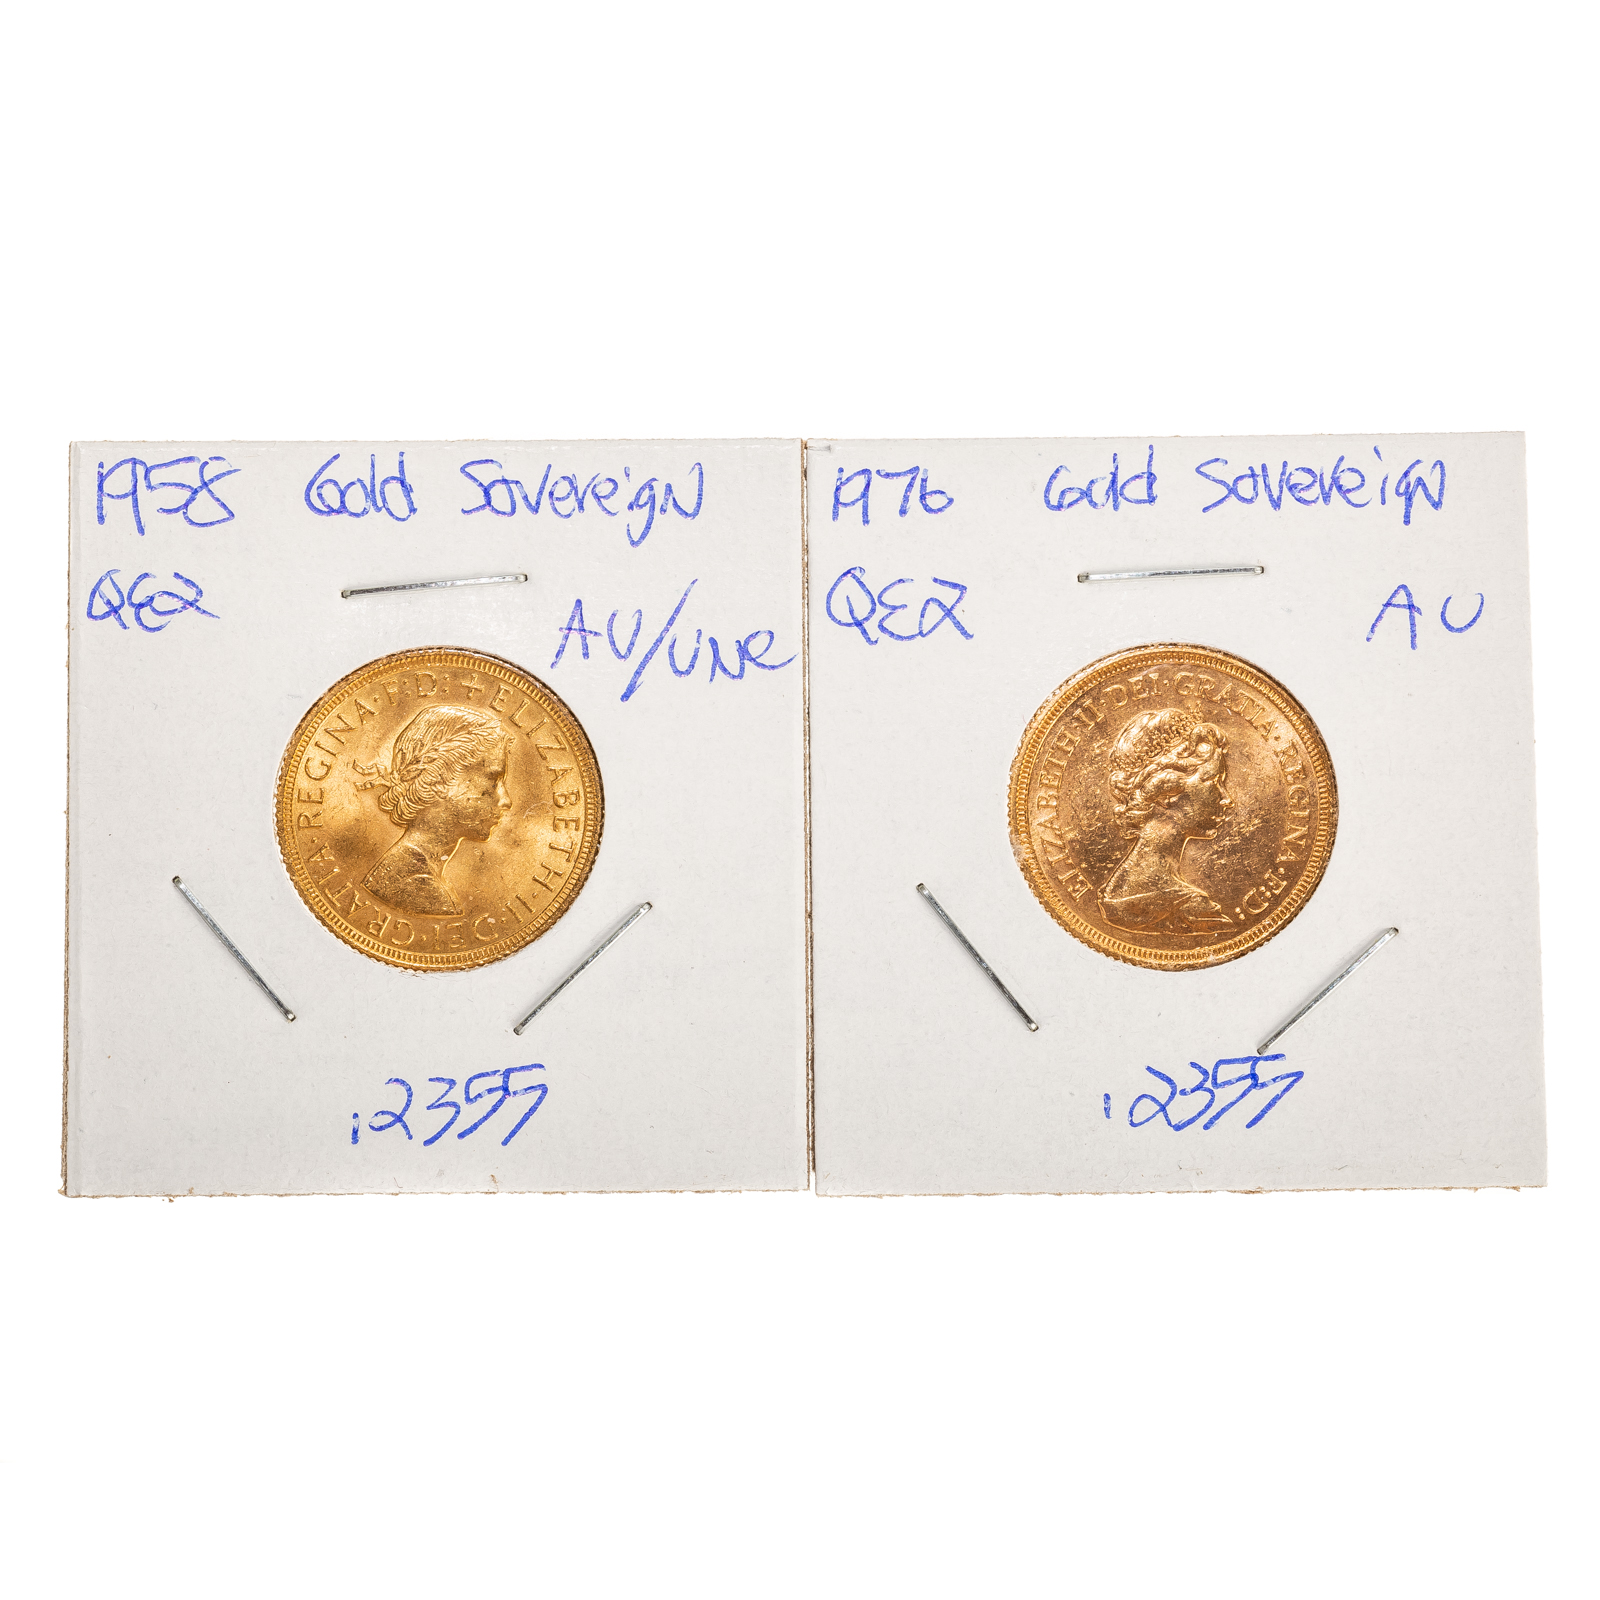 1958 1976 QE2 GOLD SOVEREIGNS 287a22